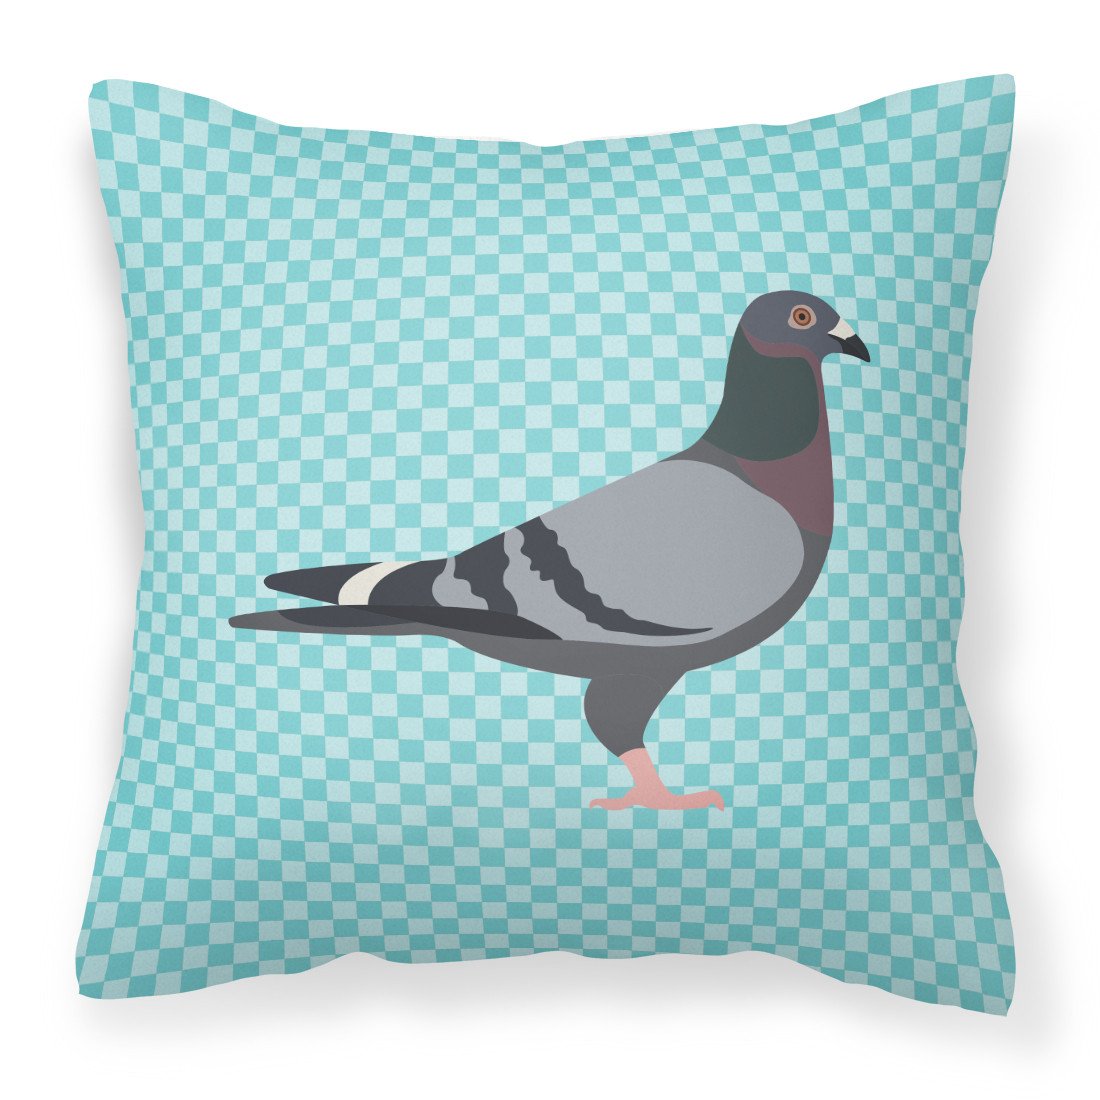 Racing Pigeon Blue Check Fabric Decorative Pillow BB8125PW1818 by Caroline's Treasures